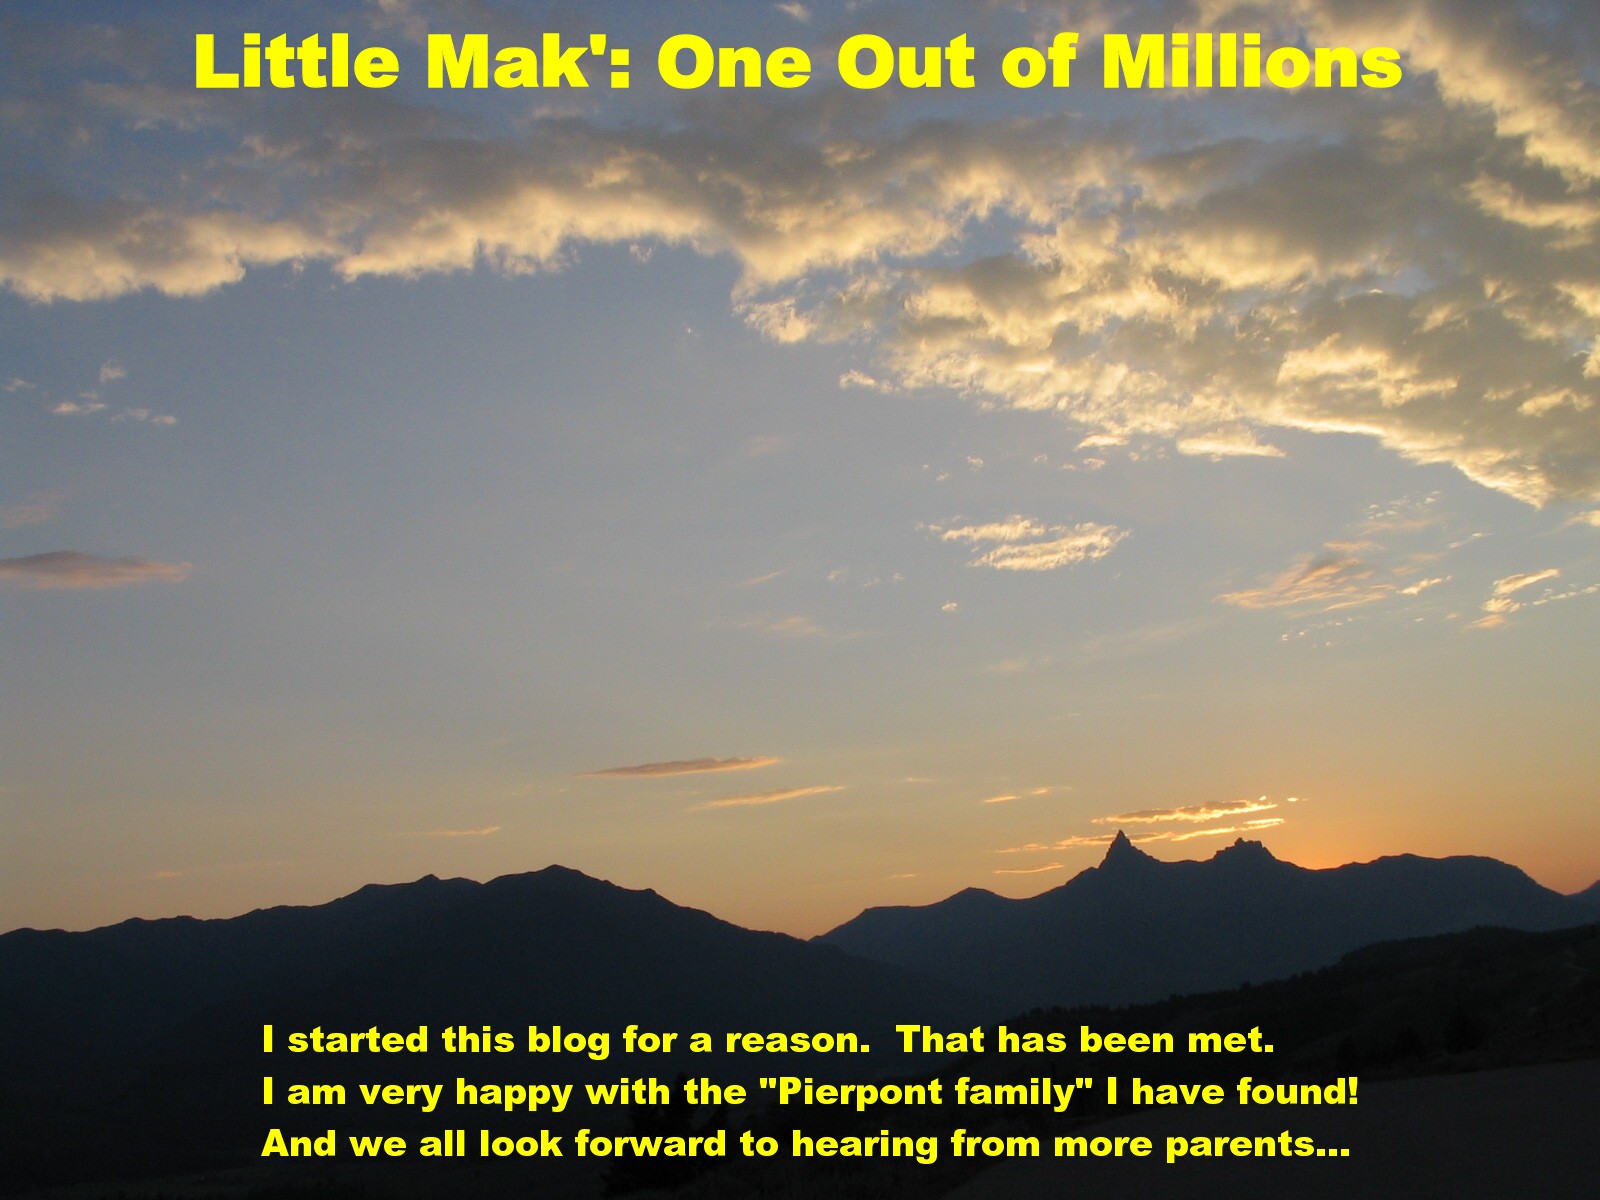 Little Mak': One out of Millions